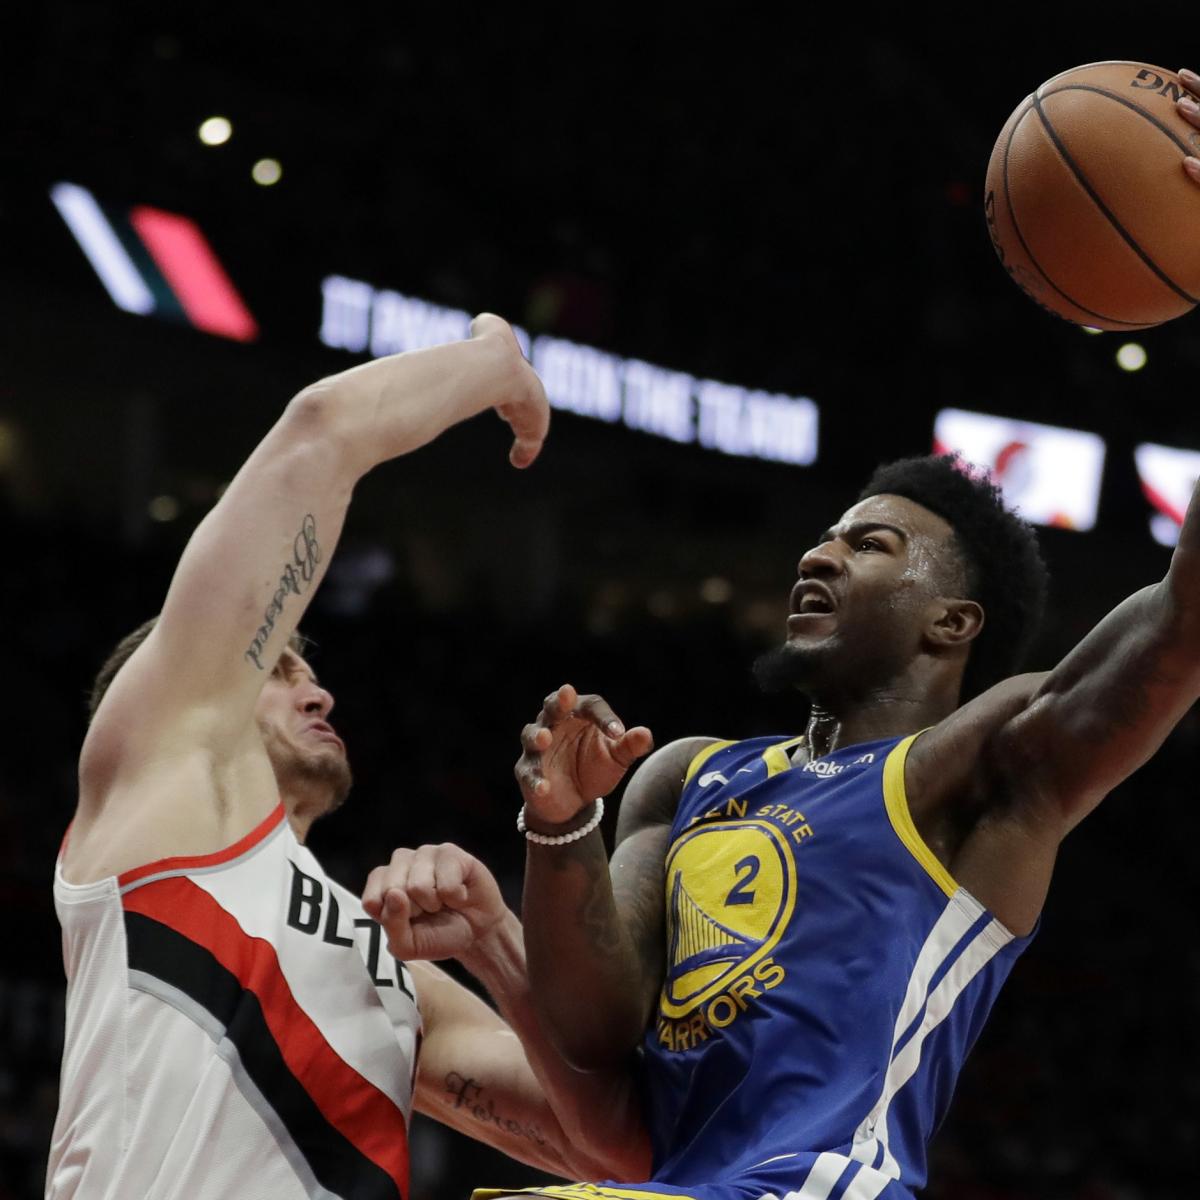 Nba Playoff Schedule 2019 Tv Coverage And Live Stream For Finals